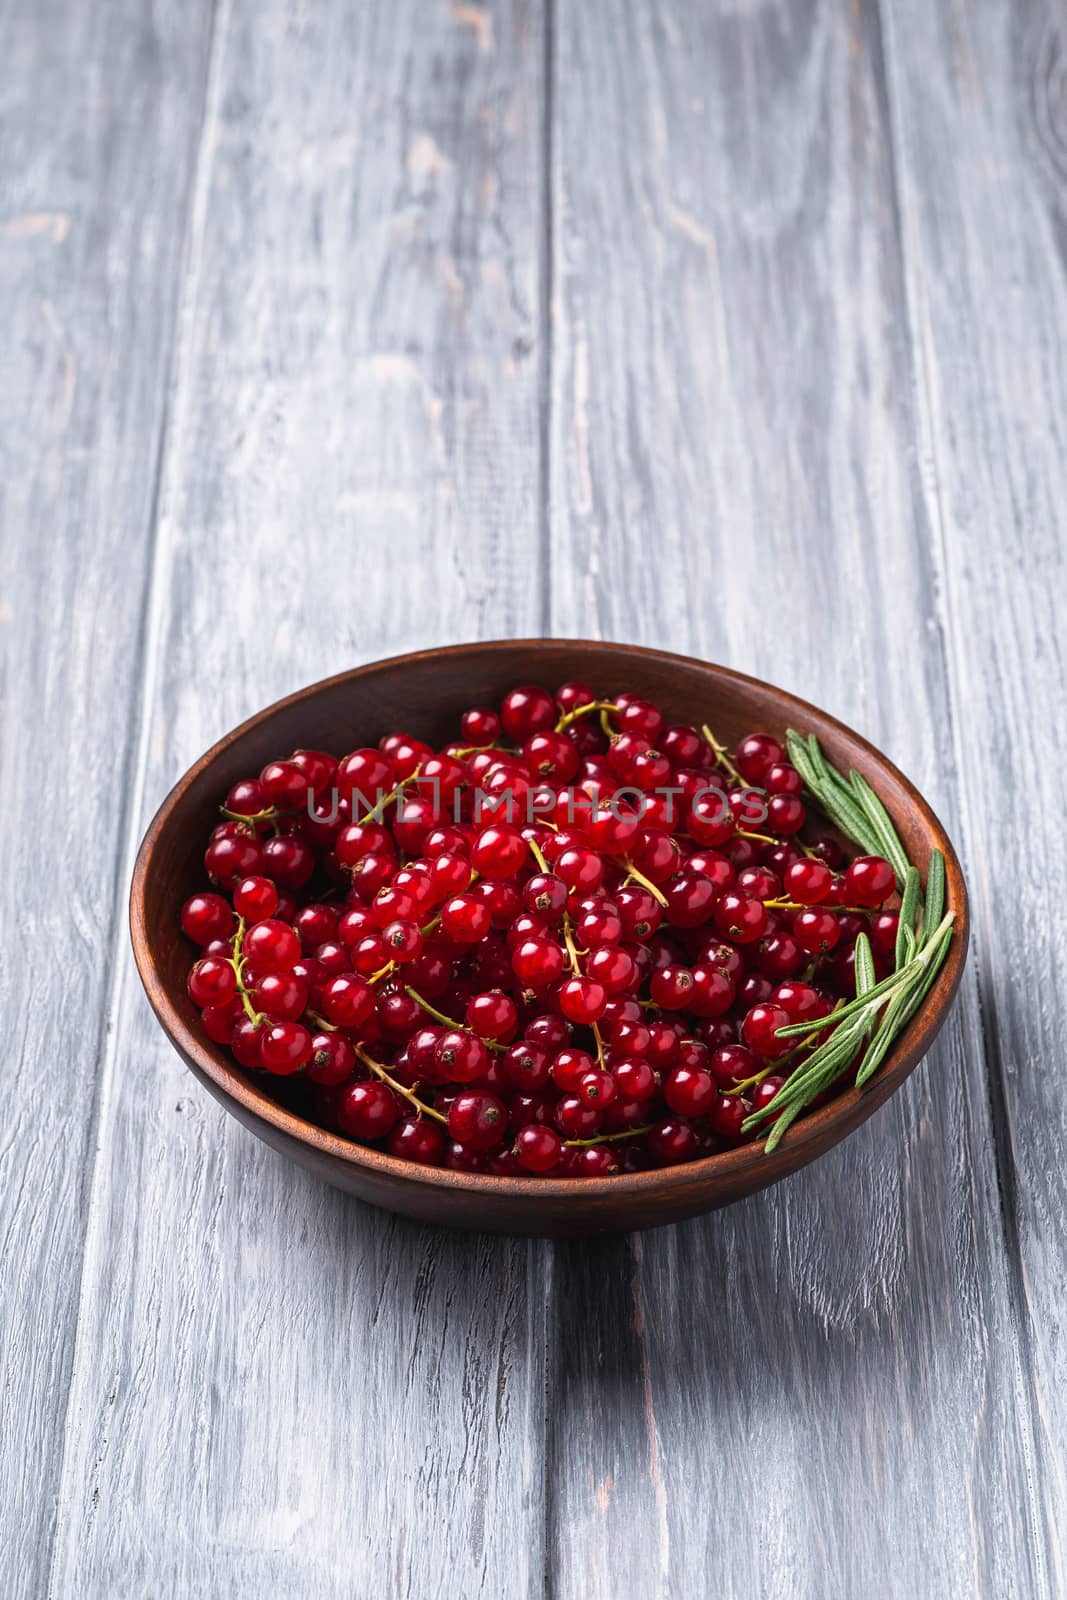 Fresh sweet red currant berries with rosemary leaves in wooden bowl, grey wood background, angle view